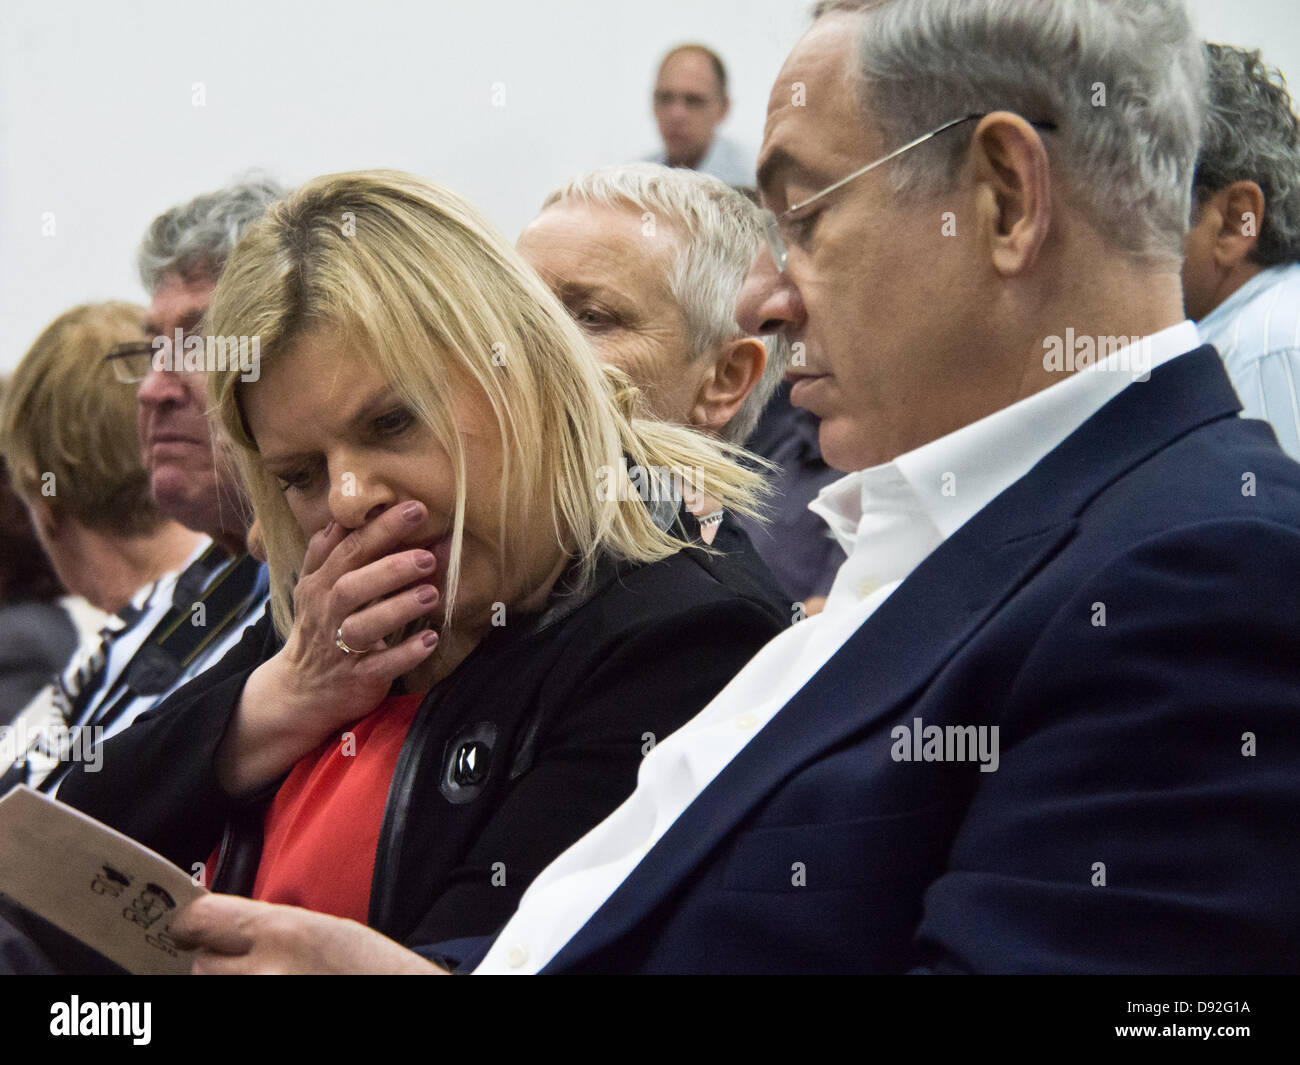 Prime Minister BENJAMIN NETANYAHU and wife SARAH NETANYAHU browse through the evening's program as they attend son's high school graduation ceremony. Jerusalem, Israel. 9-June-2013.  Prime Minister Benjamin Netanyahu and wife Sarah Netanyahu attends son's high school graduation ceremony. Stock Photo